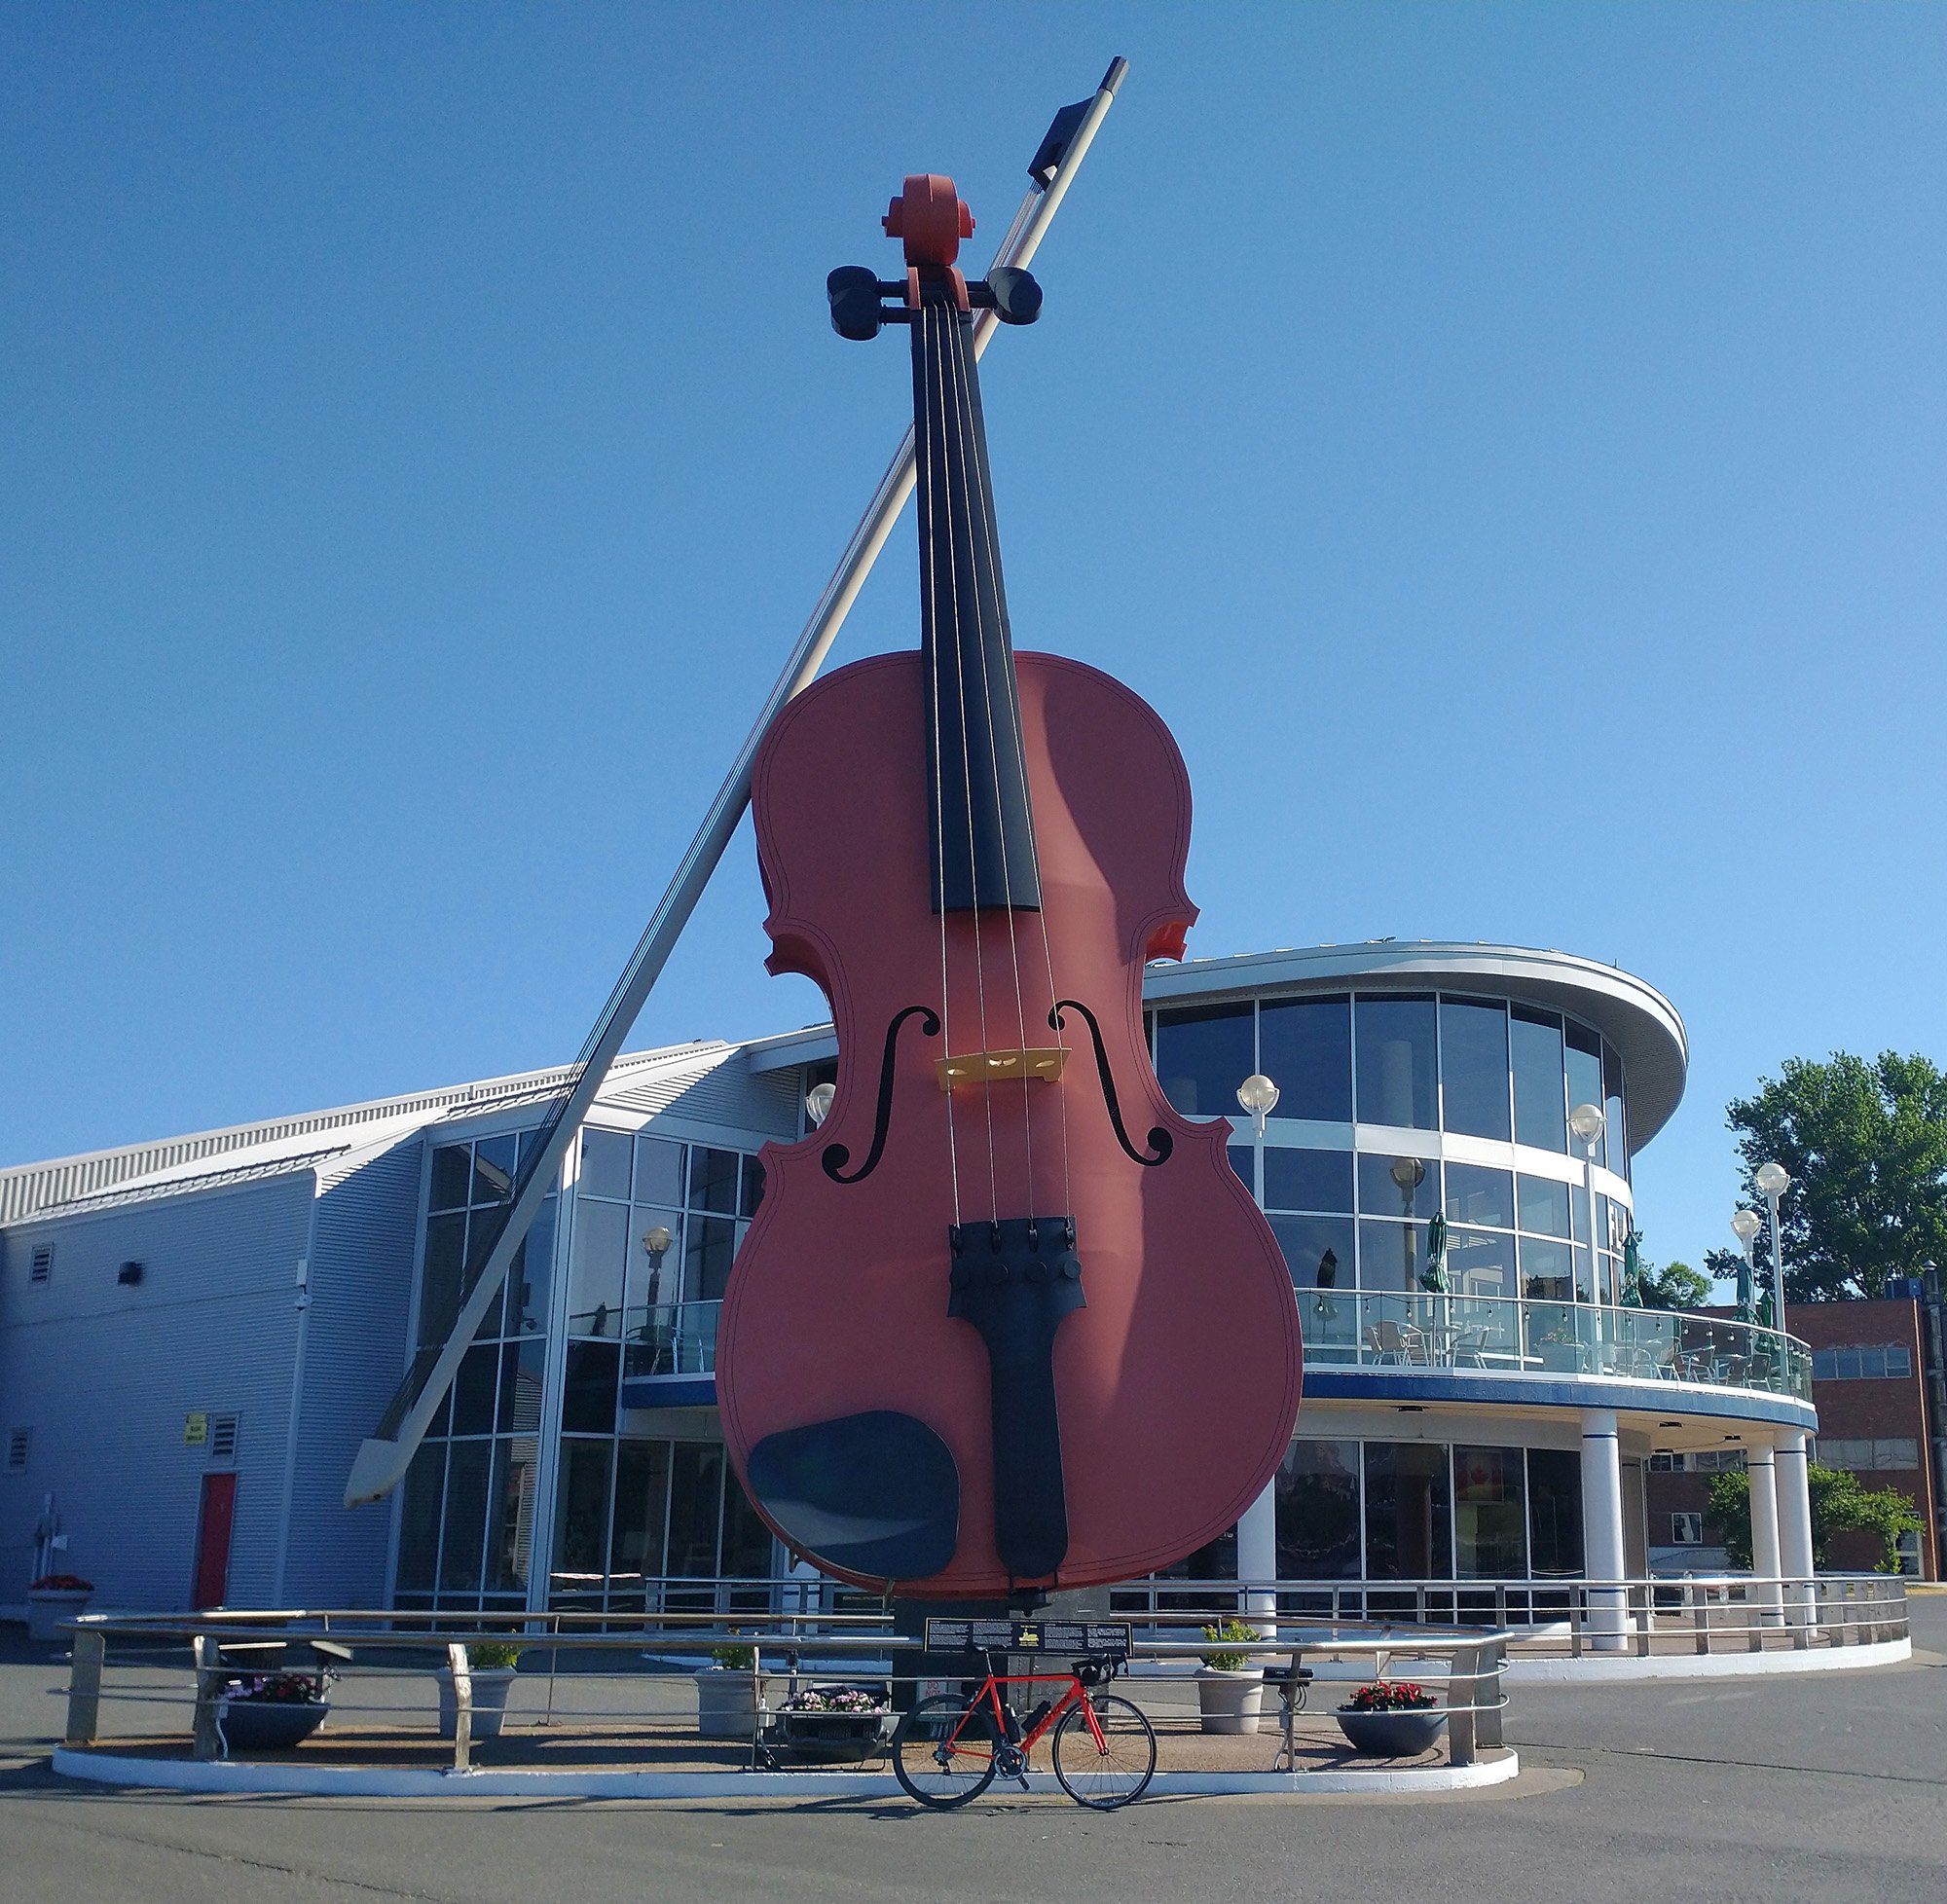 The Big Fiddle in Sydney, next to the visitor center/ port/ stuff!